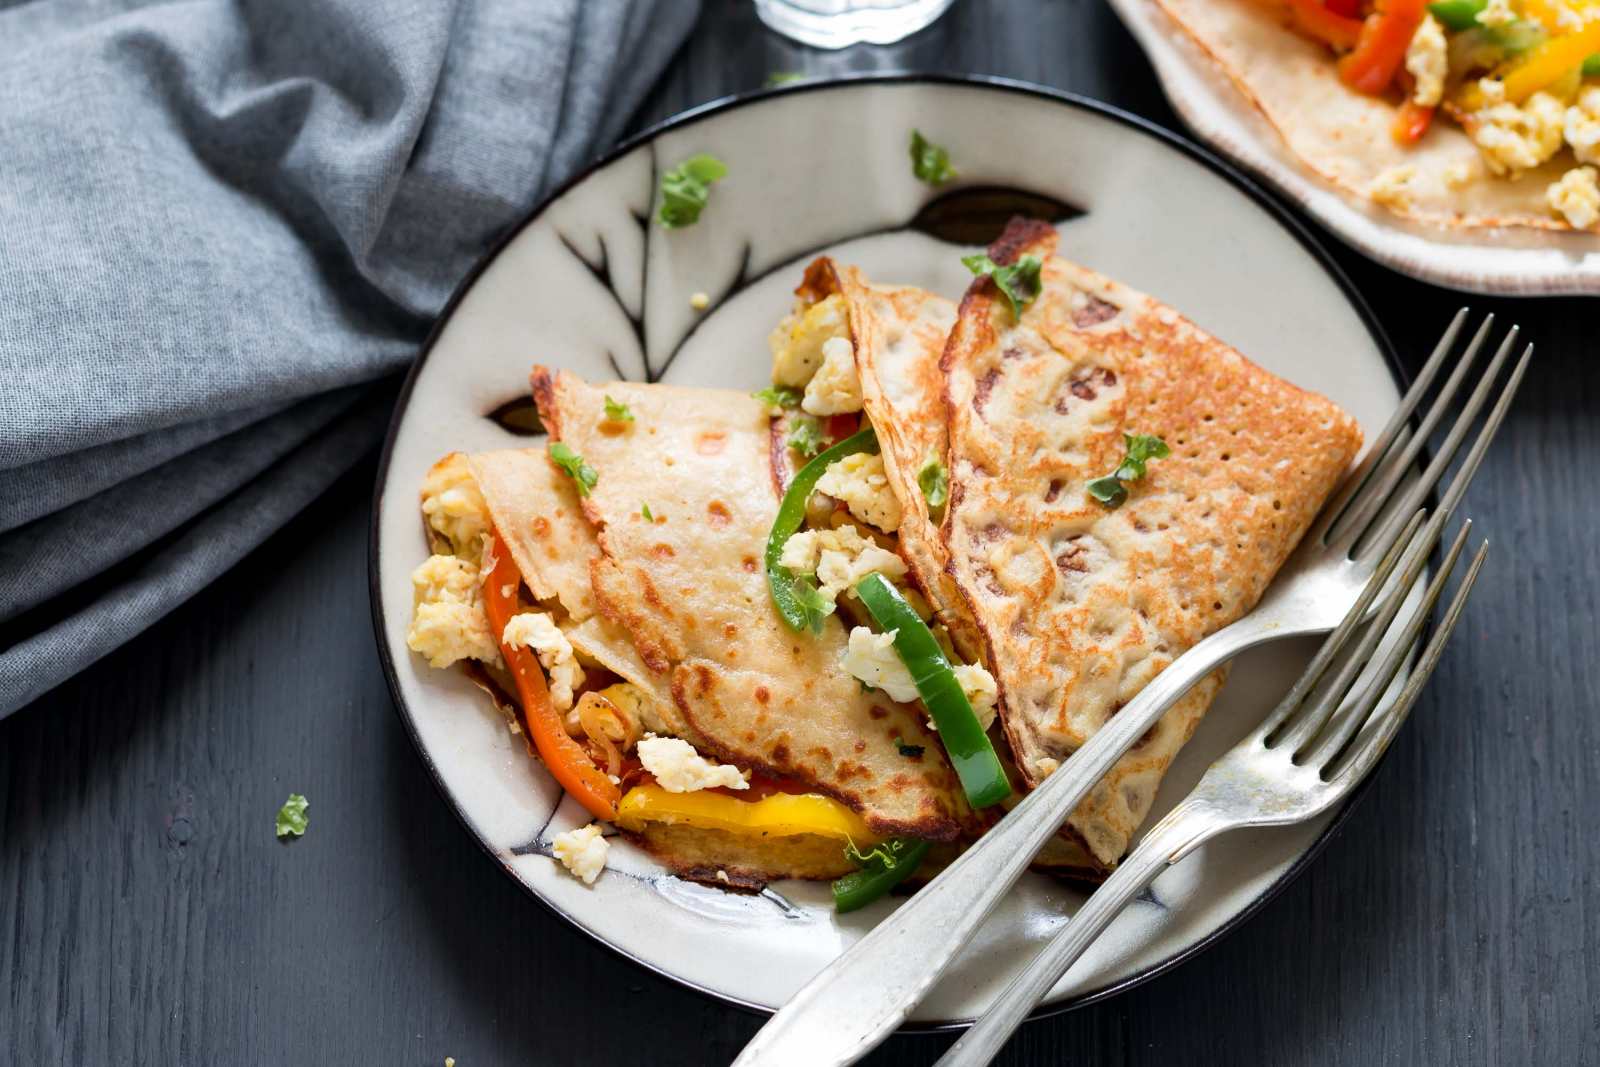 Whole Wheat Crepe with Eggs and Roasted Peppers